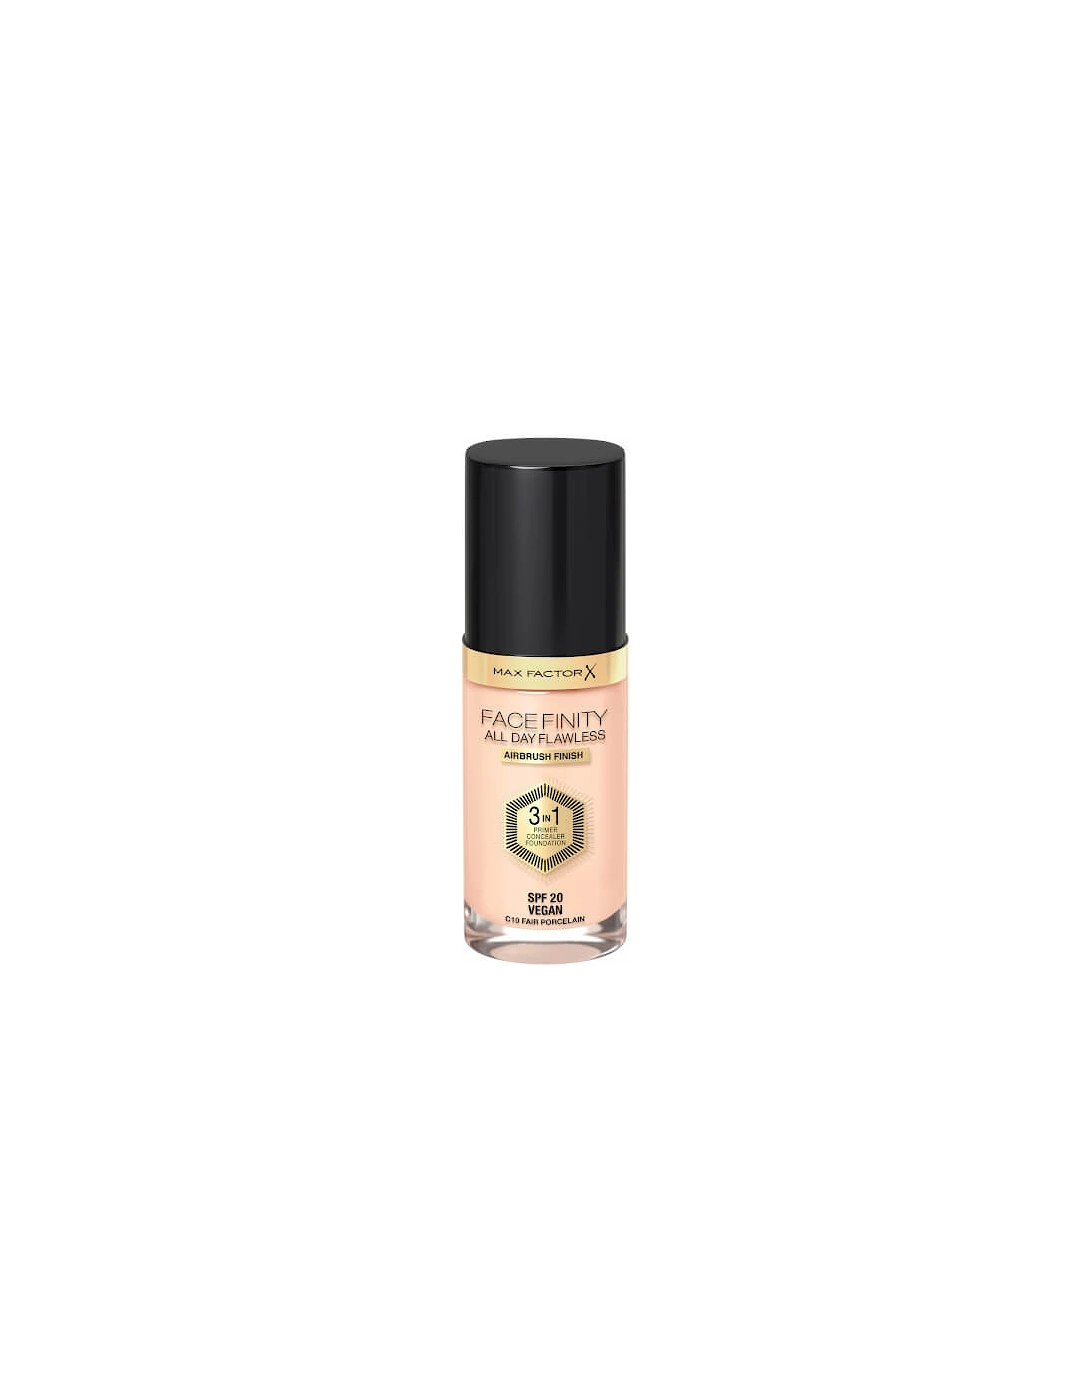 Facefinity All Day Flawless Foundation - Tawny, 31 of 30